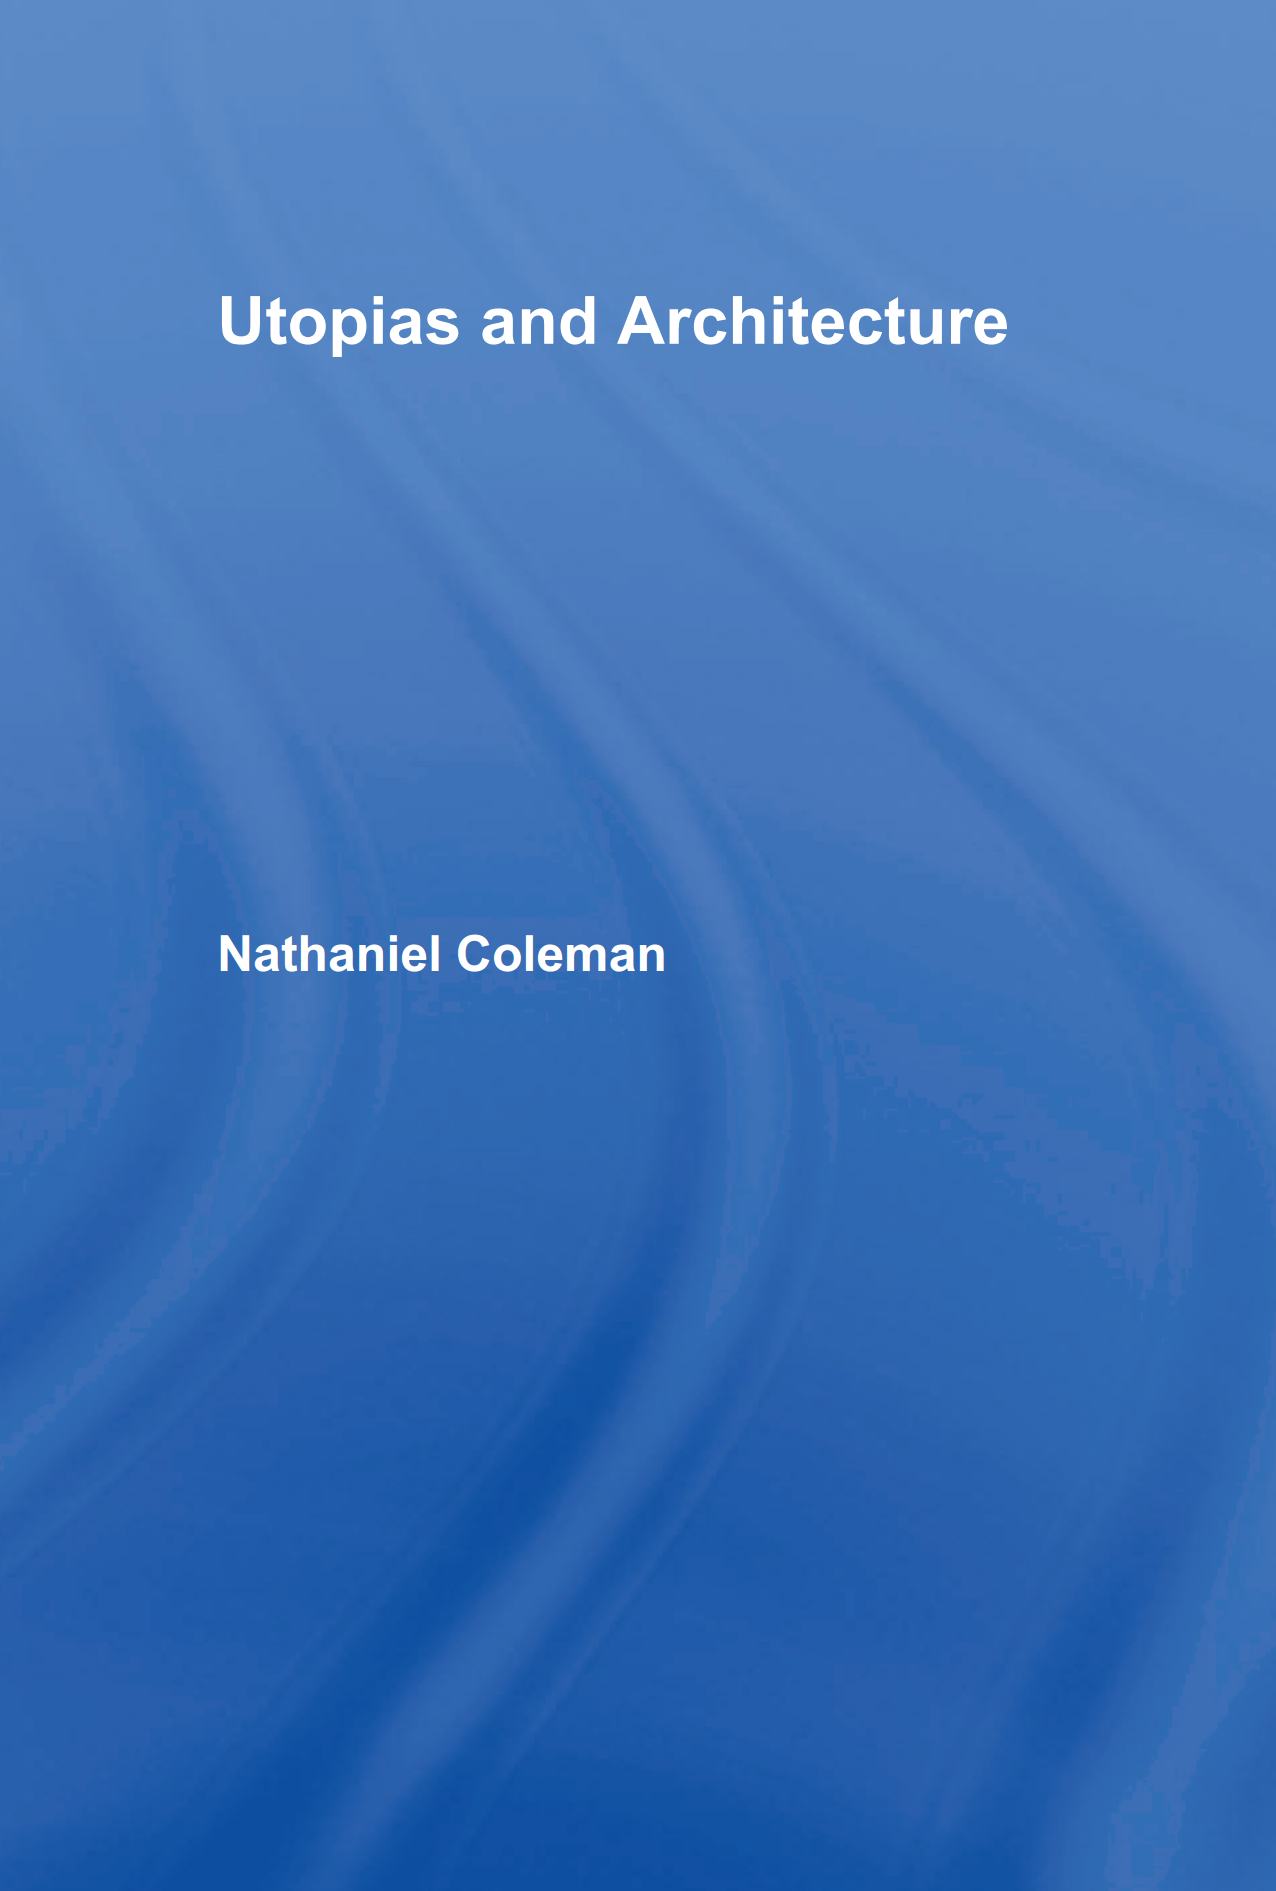 Utopias and Architecture / Nathaniel Coleman. — London ; New York : Routledge, 2005